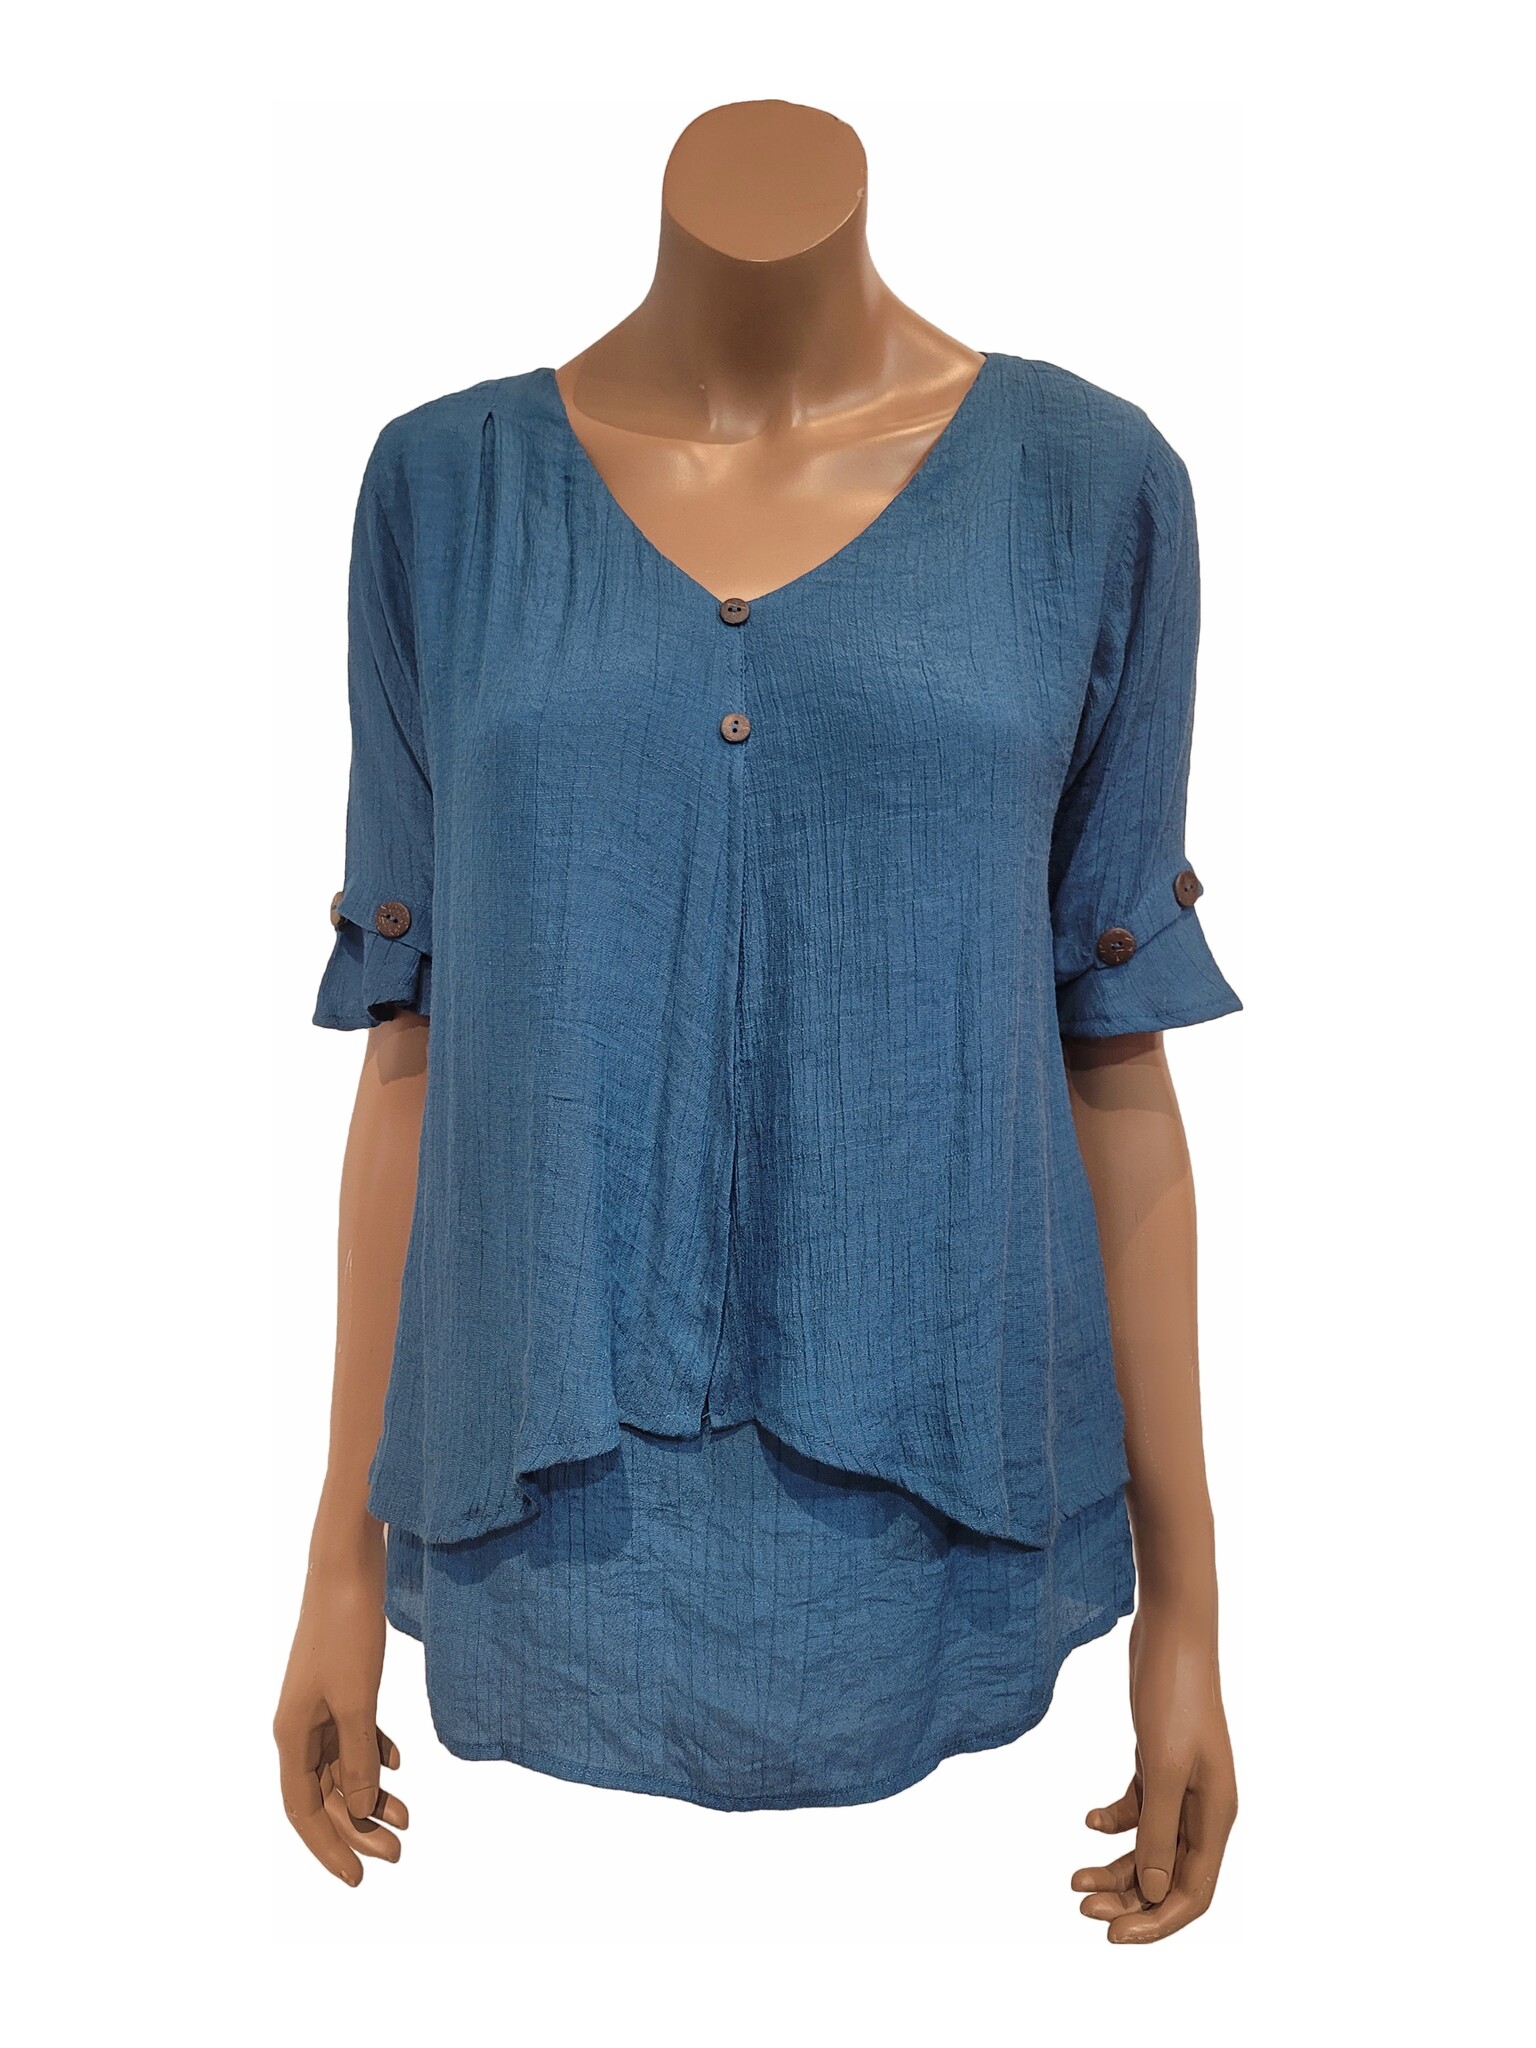 Shirt With 2 Hanging Layers, Short Sleeves, Bamboo-Cotton-PA 